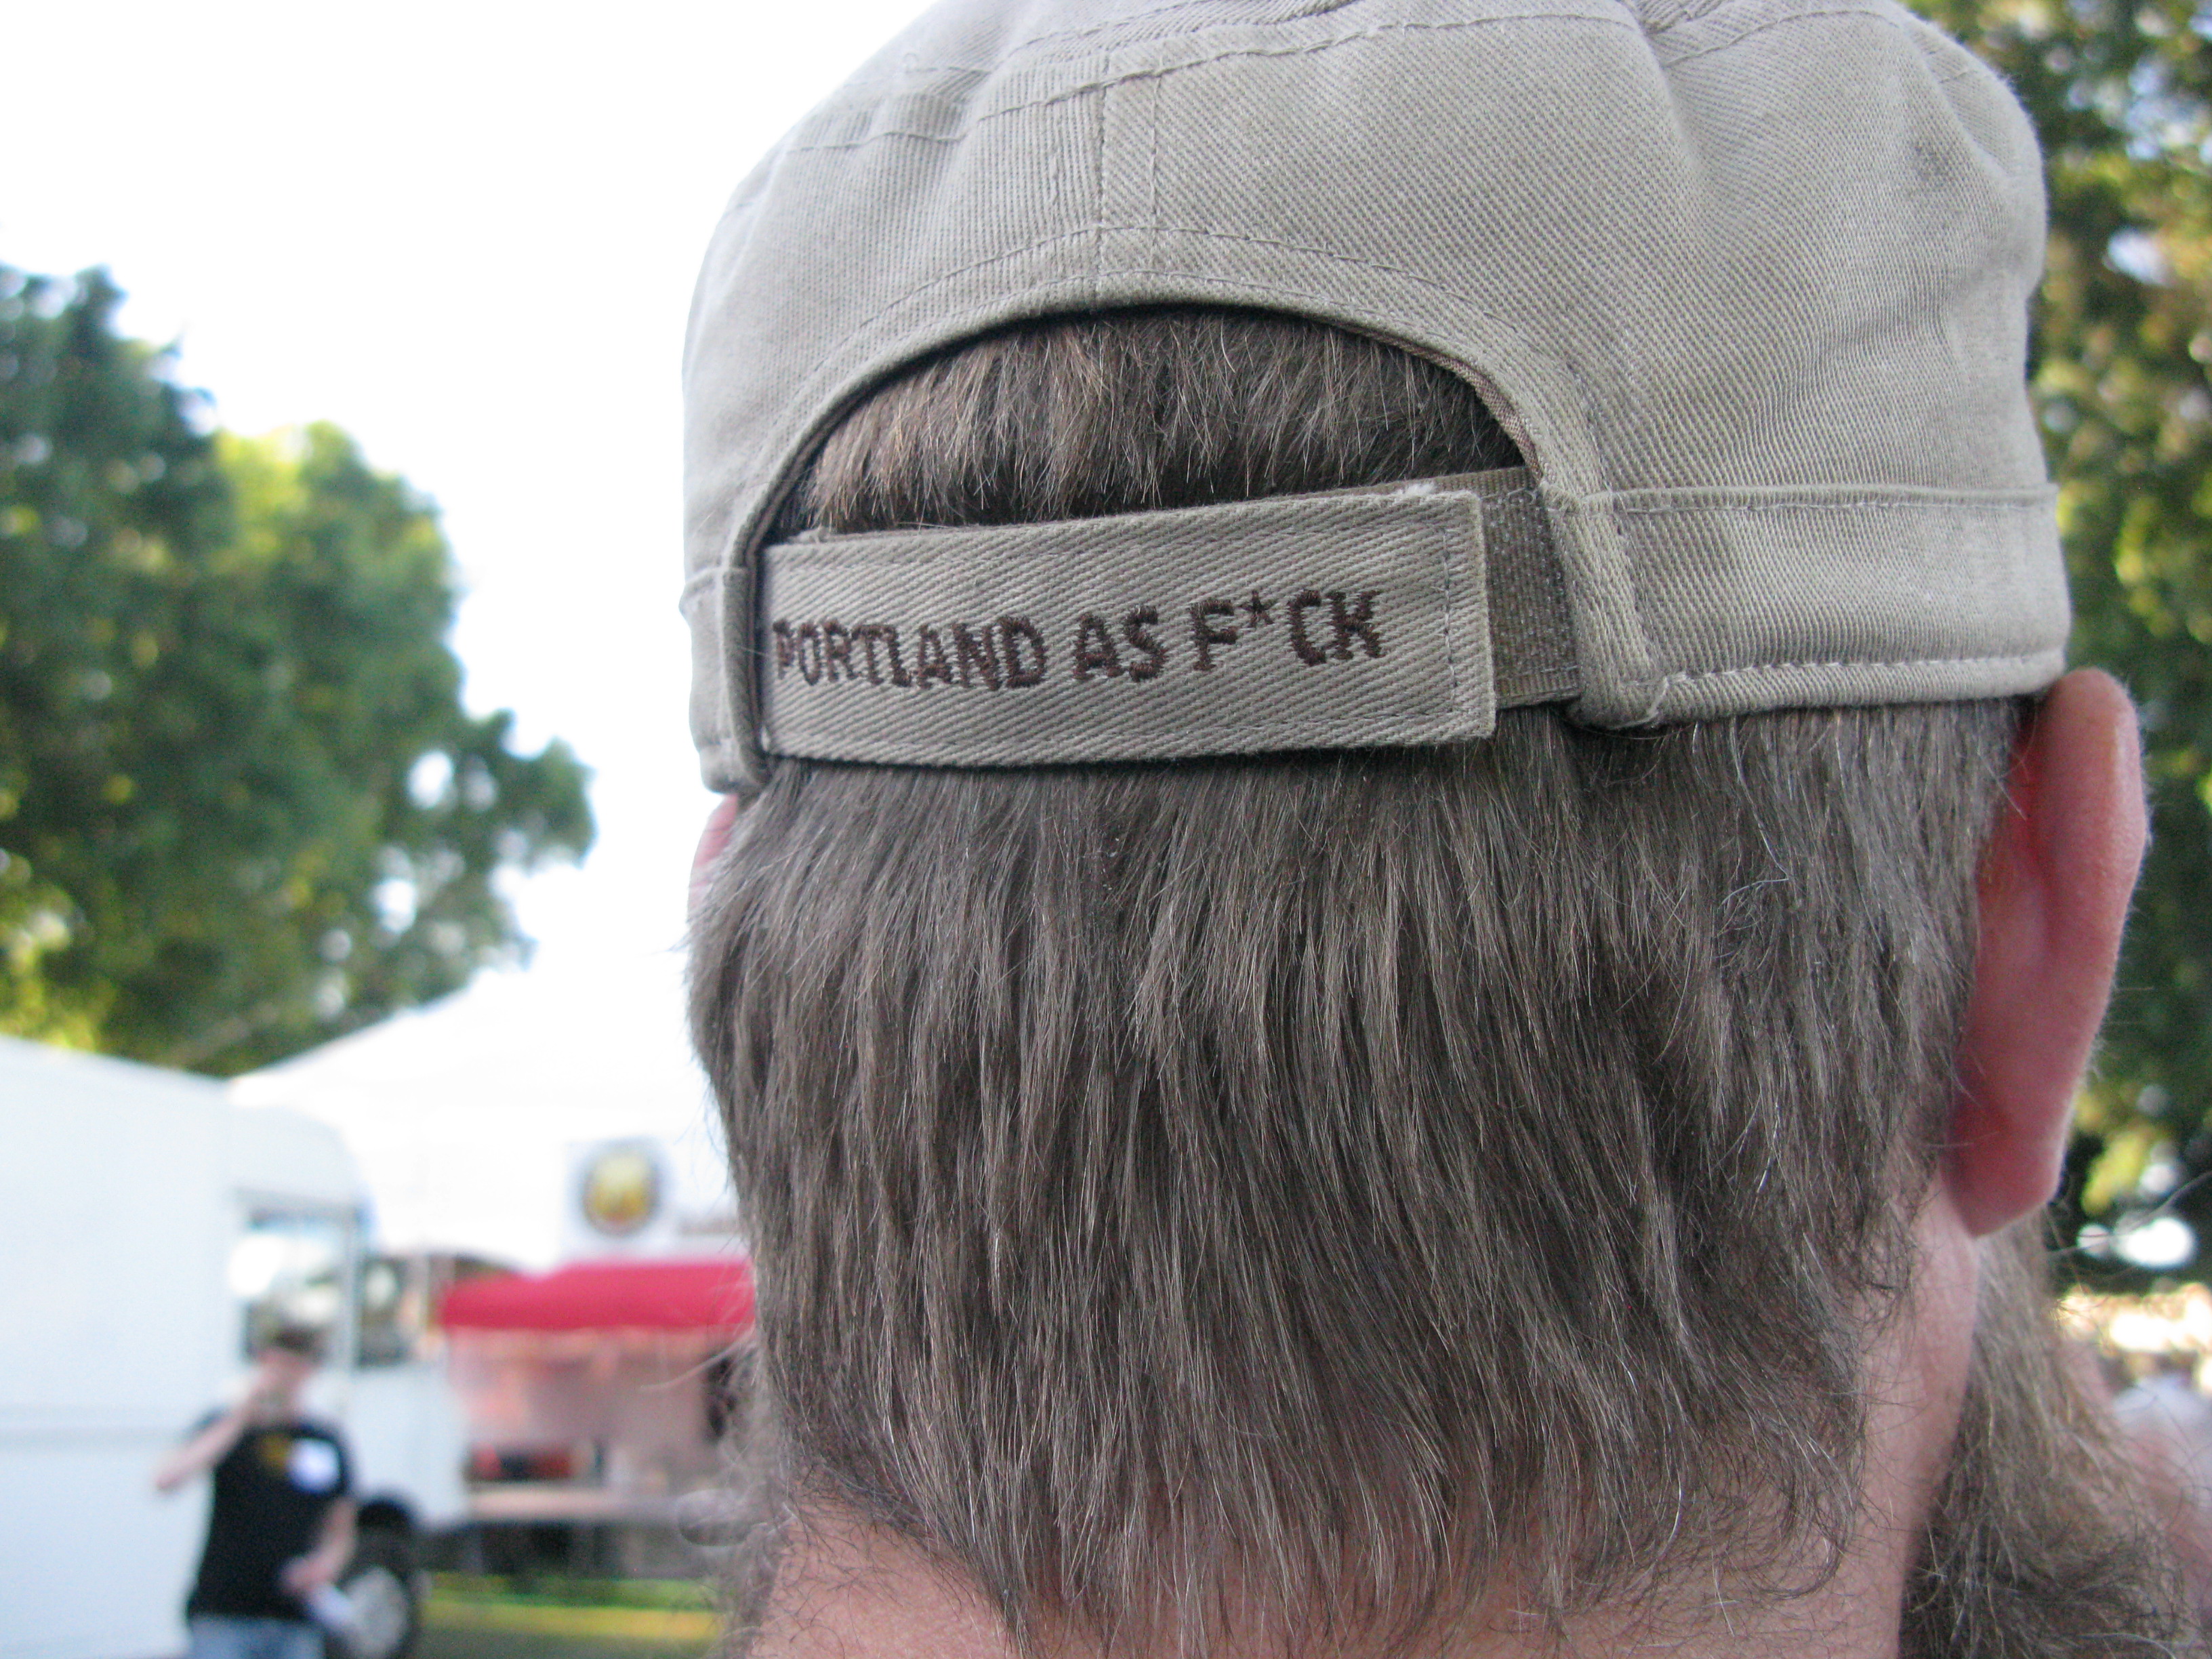 And here's the back of Carston Haney's Ross Island Brewing hat. (FoystonFoto)